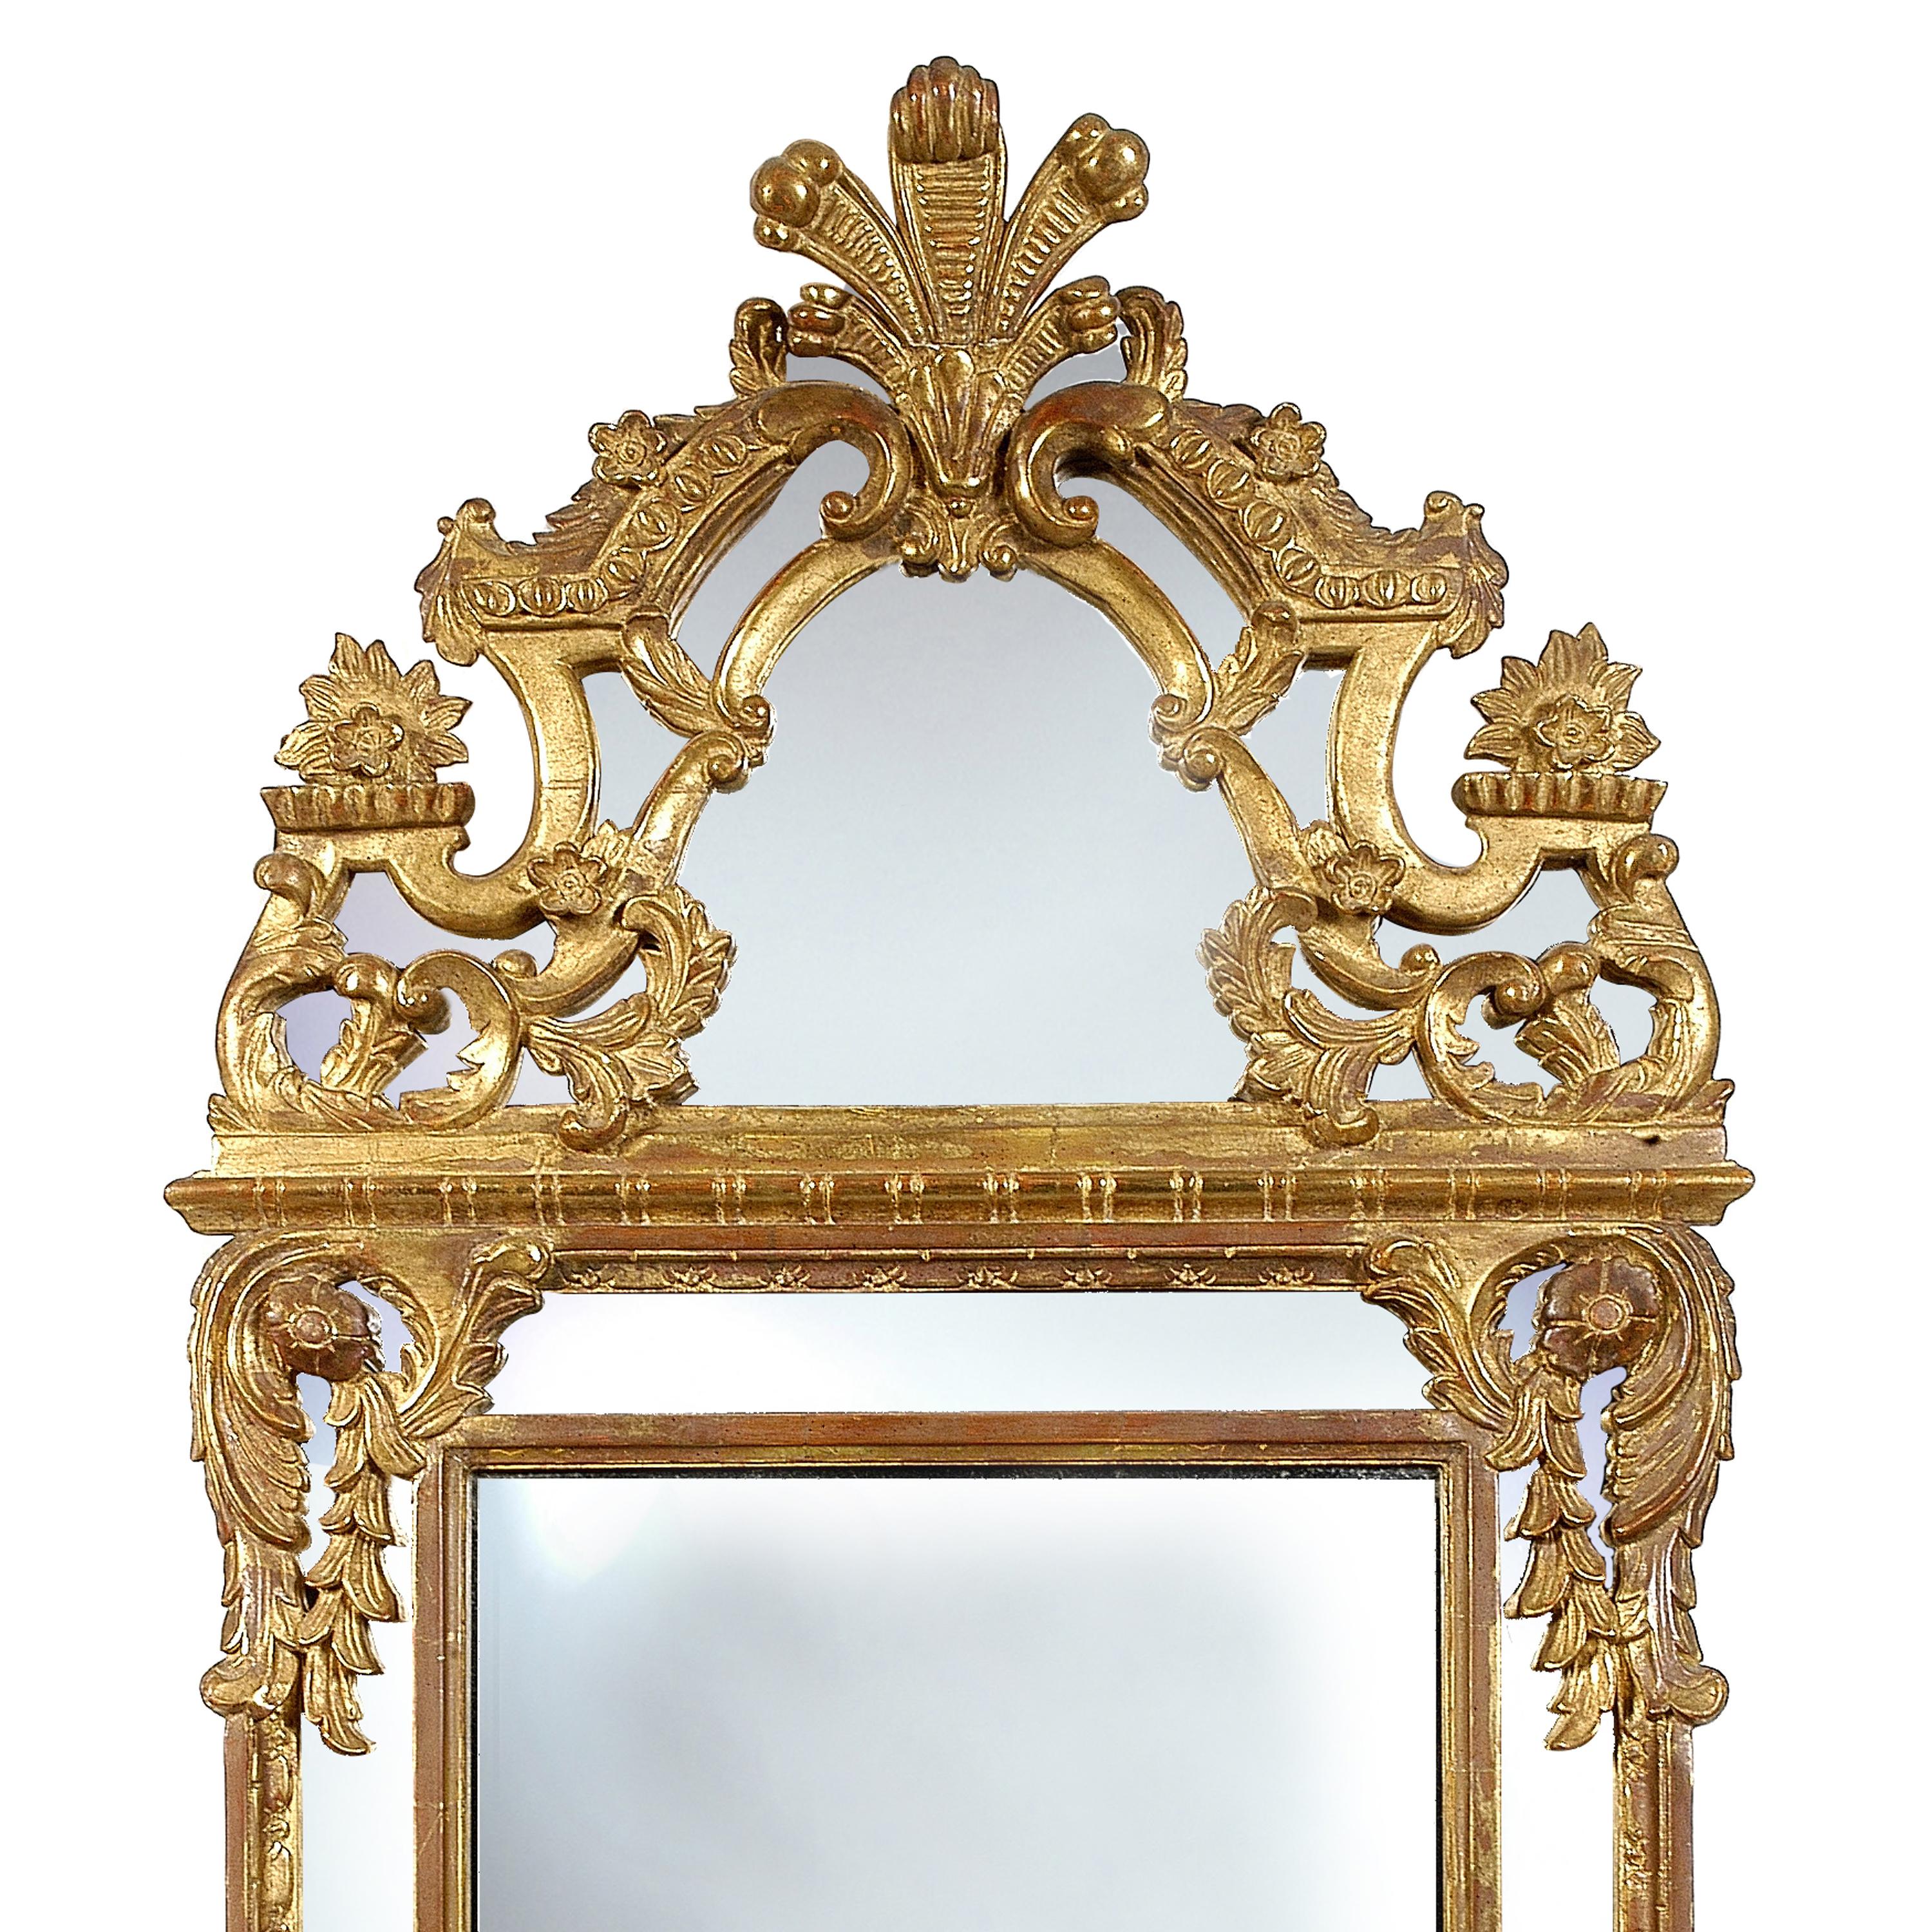 Neoclassical Regency style handcrafted mirror. Rectangular hand carved wooden structure with gold foil finished, Spain, 1970.